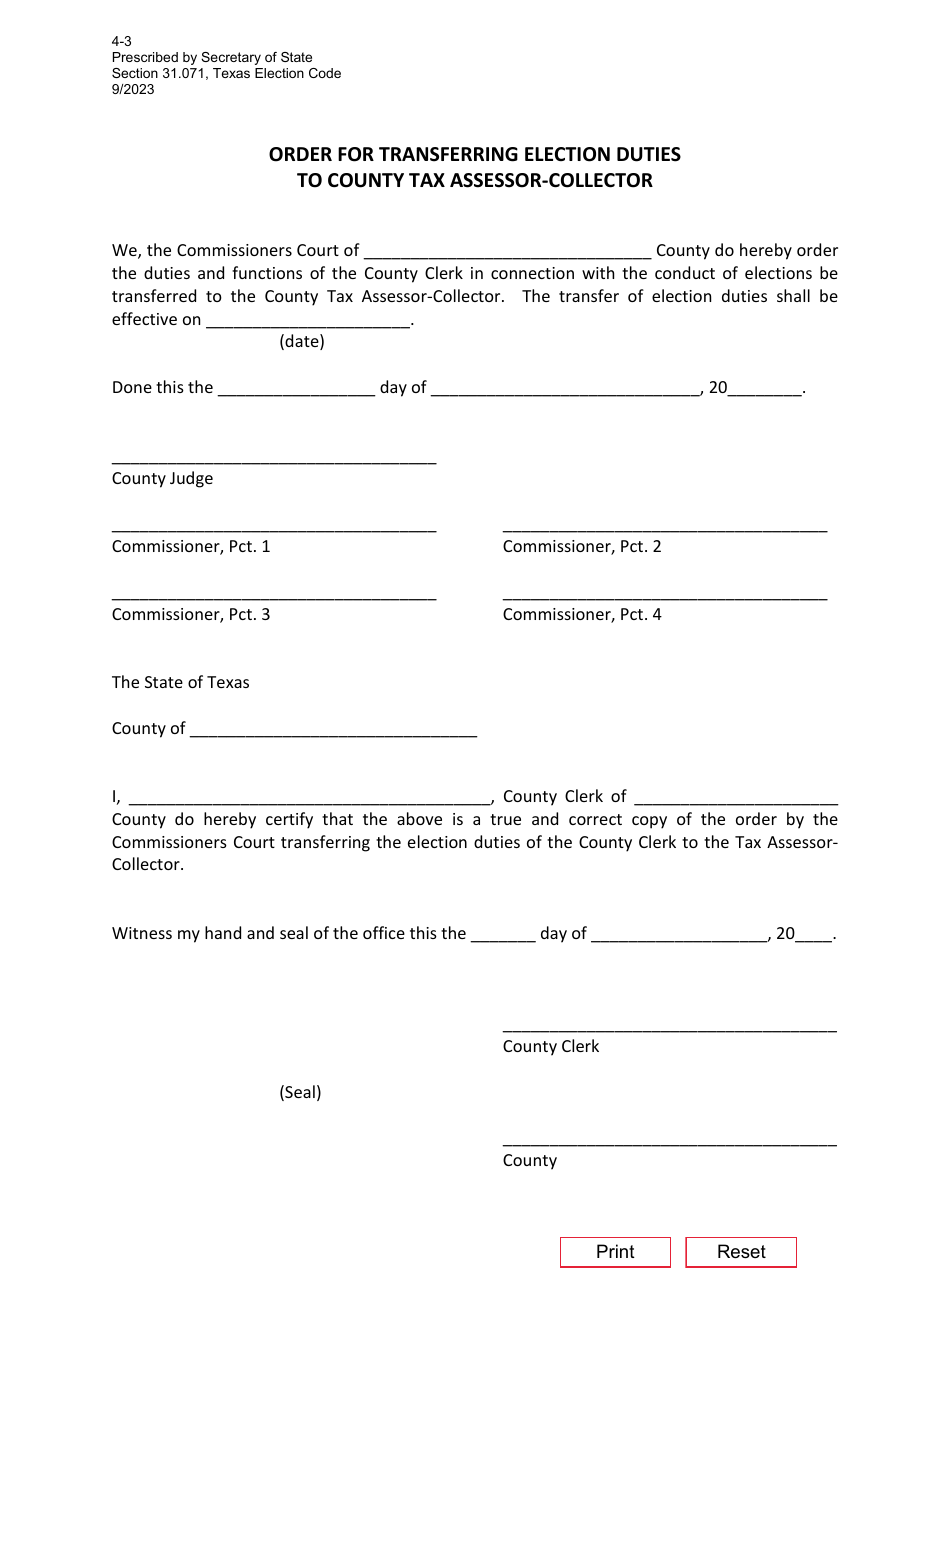 Form 4-3 Order for Transferring Election Duties to County Tax Assessor-Collector - Texas, Page 1